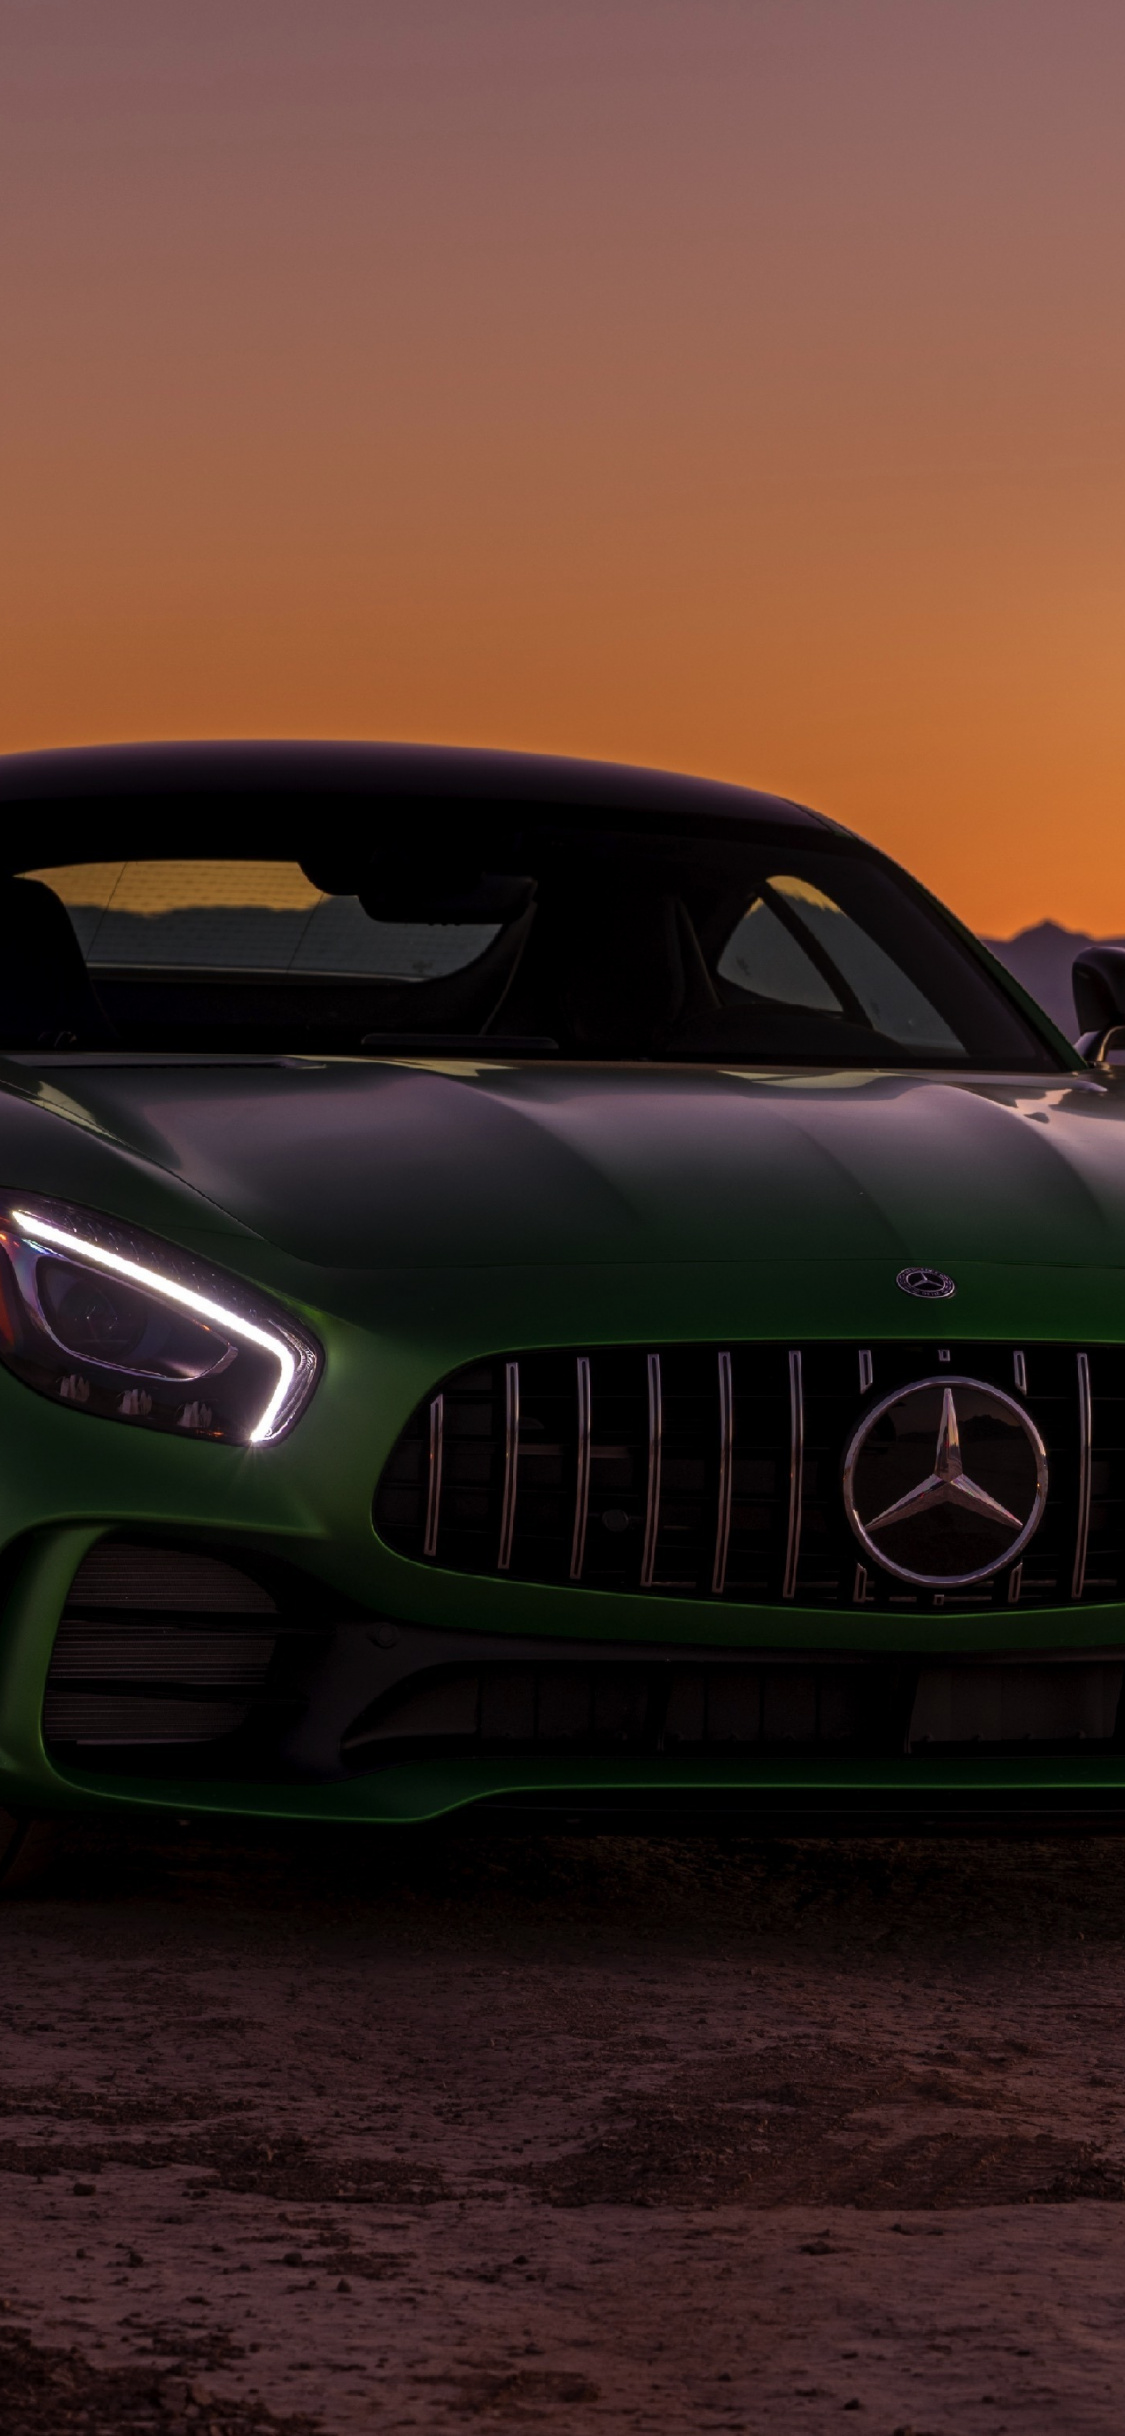 The Mercedes Amg Gt R, Sports Car, Front, Wallpaper X Mercedes Amg